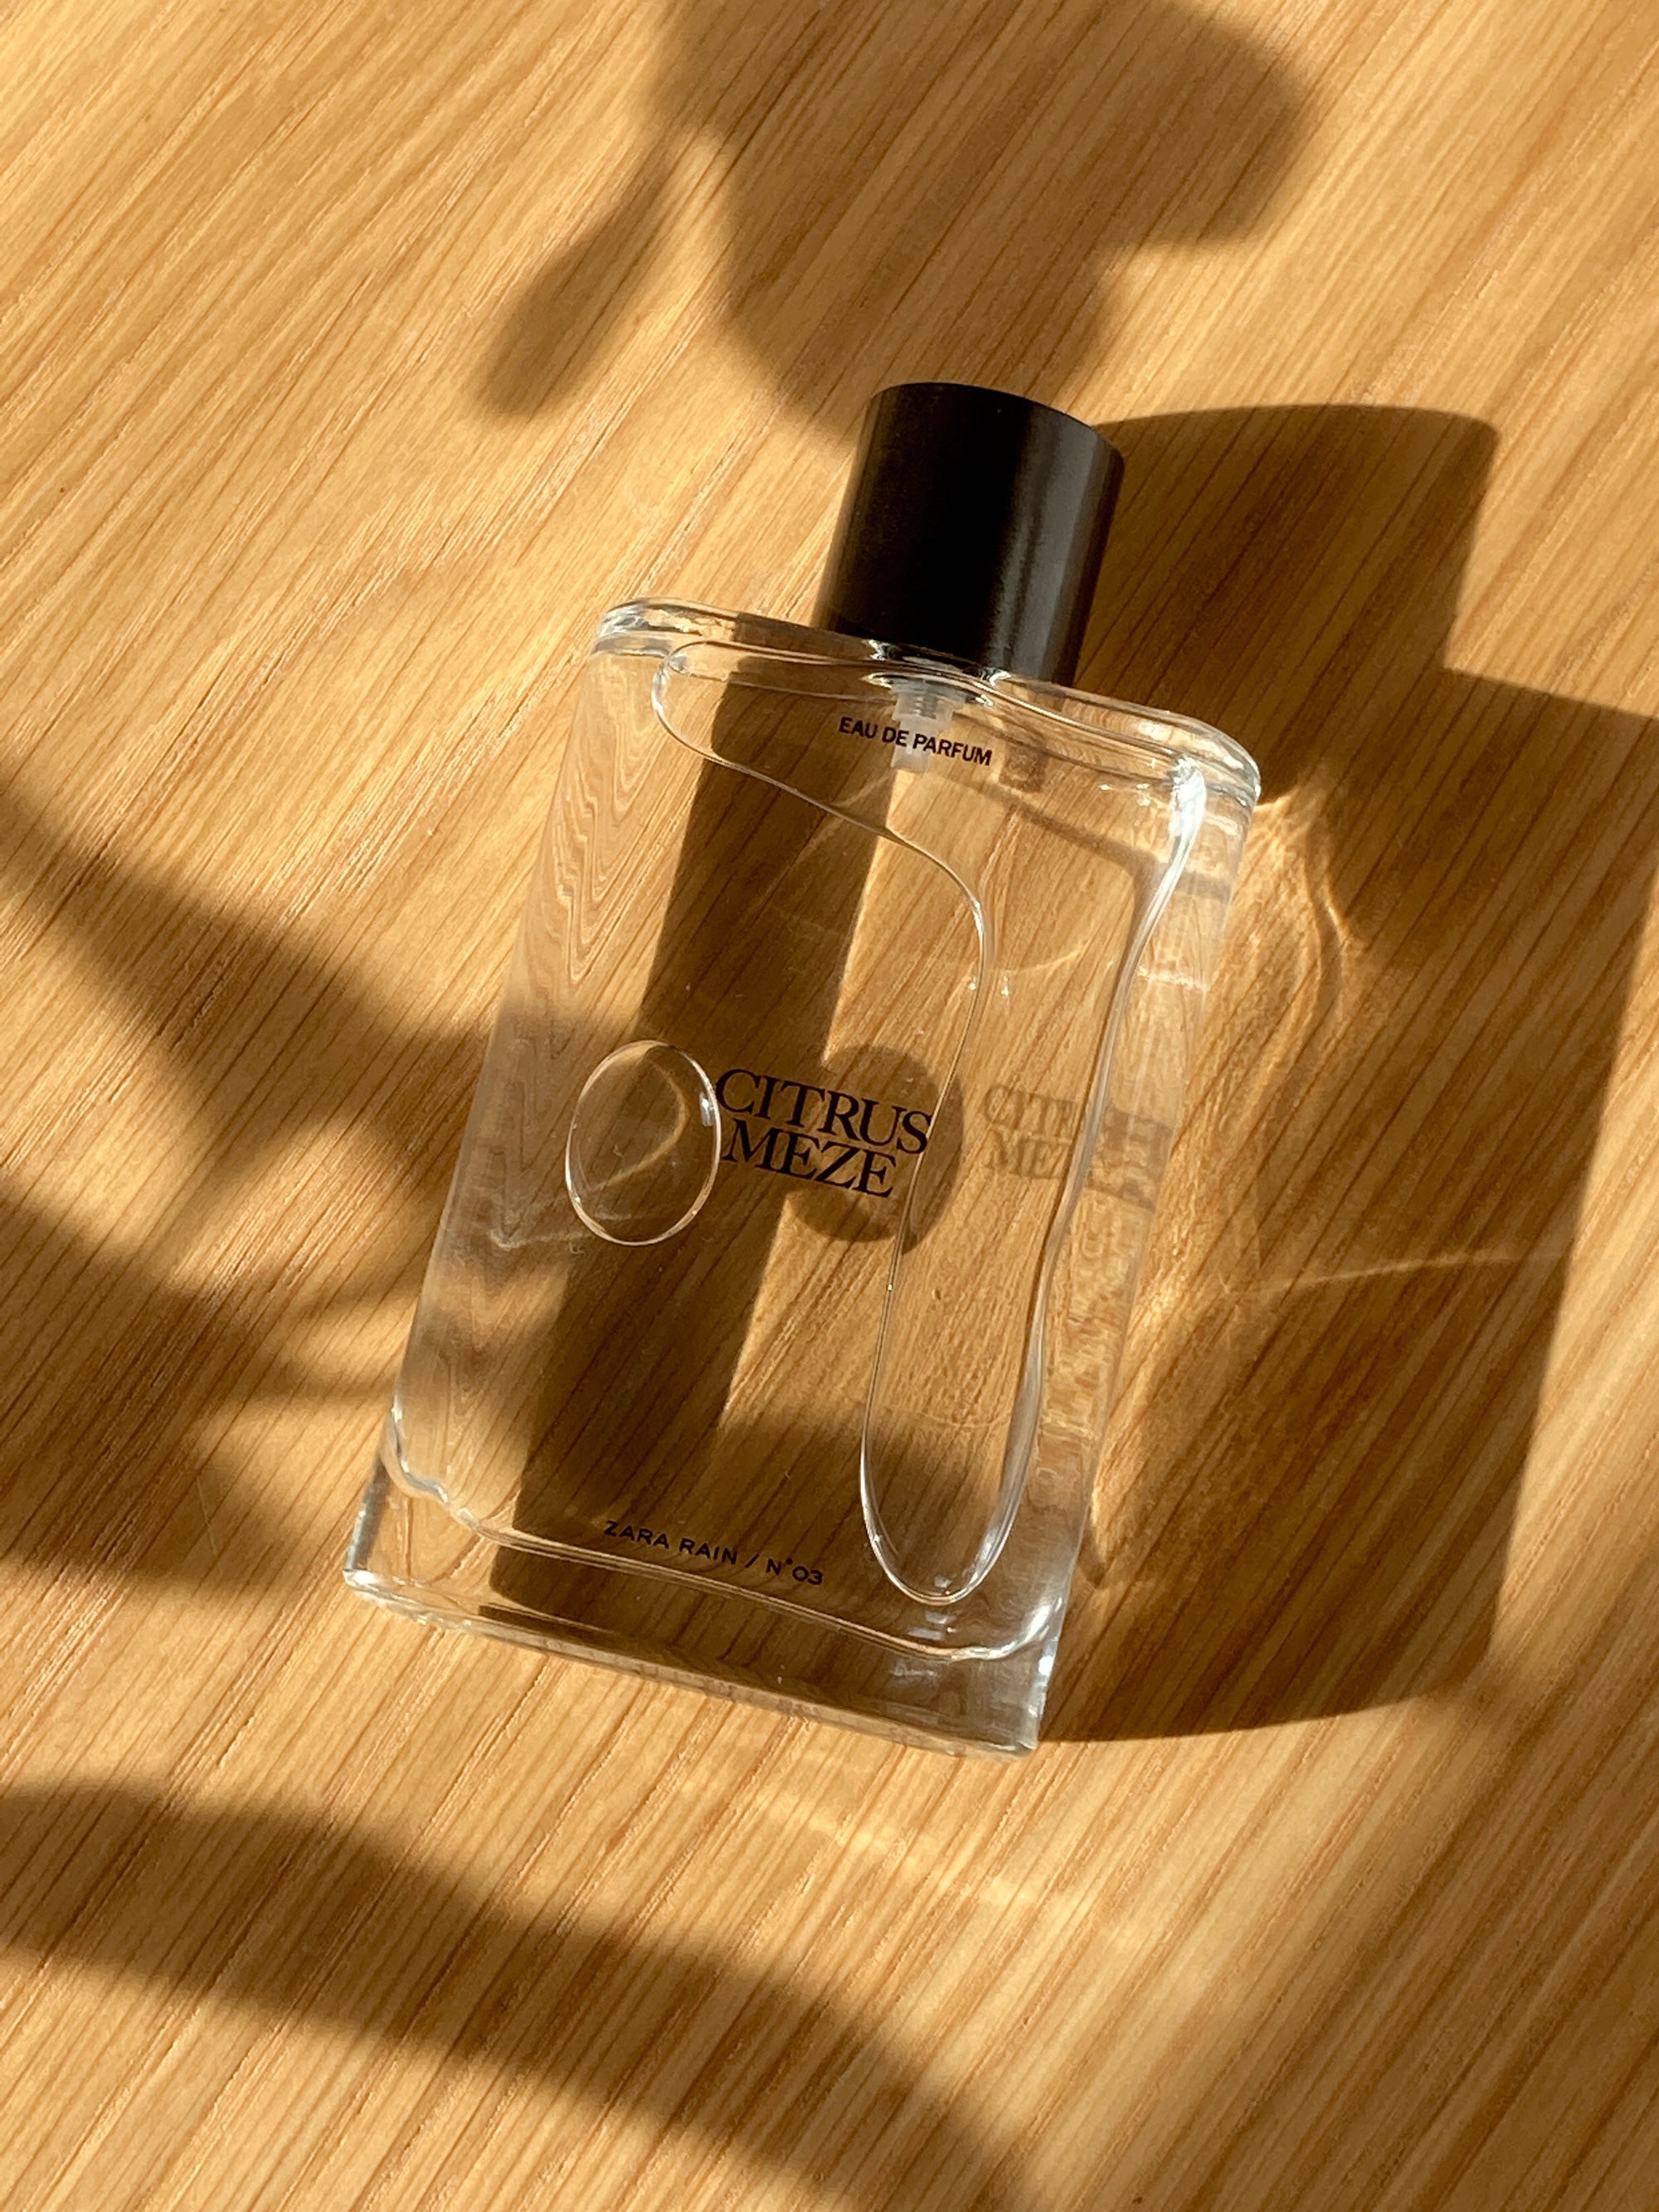 Zara's Chloé perfume dupe is on sale and only £7.99 - YOU Magazine - The  Mail